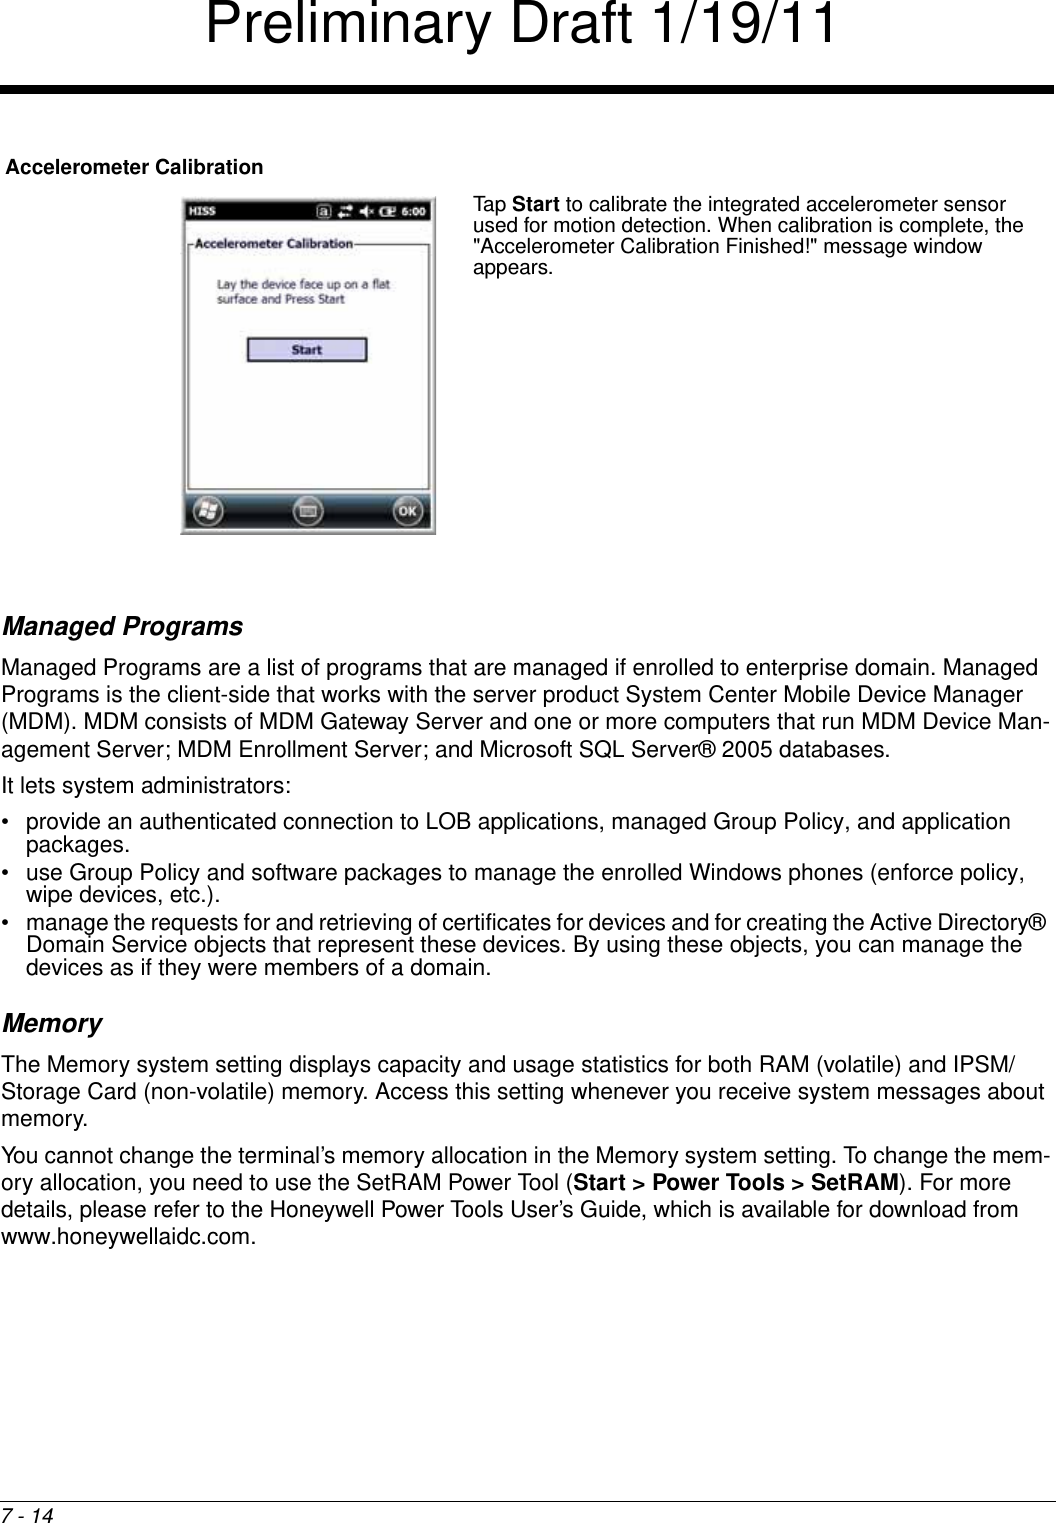 7 - 14Managed ProgramsManaged Programs are a list of programs that are managed if enrolled to enterprise domain. Managed Programs is the client-side that works with the server product System Center Mobile Device Manager (MDM). MDM consists of MDM Gateway Server and one or more computers that run MDM Device Man-agement Server; MDM Enrollment Server; and Microsoft SQL Server® 2005 databases. It lets system administrators:• provide an authenticated connection to LOB applications, managed Group Policy, and application packages.• use Group Policy and software packages to manage the enrolled Windows phones (enforce policy, wipe devices, etc.). • manage the requests for and retrieving of certificates for devices and for creating the Active Directory® Domain Service objects that represent these devices. By using these objects, you can manage the devices as if they were members of a domain.MemoryThe Memory system setting displays capacity and usage statistics for both RAM (volatile) and IPSM/Storage Card (non-volatile) memory. Access this setting whenever you receive system messages about memory.You cannot change the terminal’s memory allocation in the Memory system setting. To change the mem-ory allocation, you need to use the SetRAM Power Tool (Start &gt; Power Tools &gt; SetRAM). For more details, please refer to the Honeywell Power Tools User’s Guide, which is available for download from www.honeywellaidc.com.Accelerometer CalibrationTap Start to calibrate the integrated accelerometer sensor used for motion detection. When calibration is complete, the &quot;Accelerometer Calibration Finished!&quot; message window appears.Preliminary Draft 1/19/11